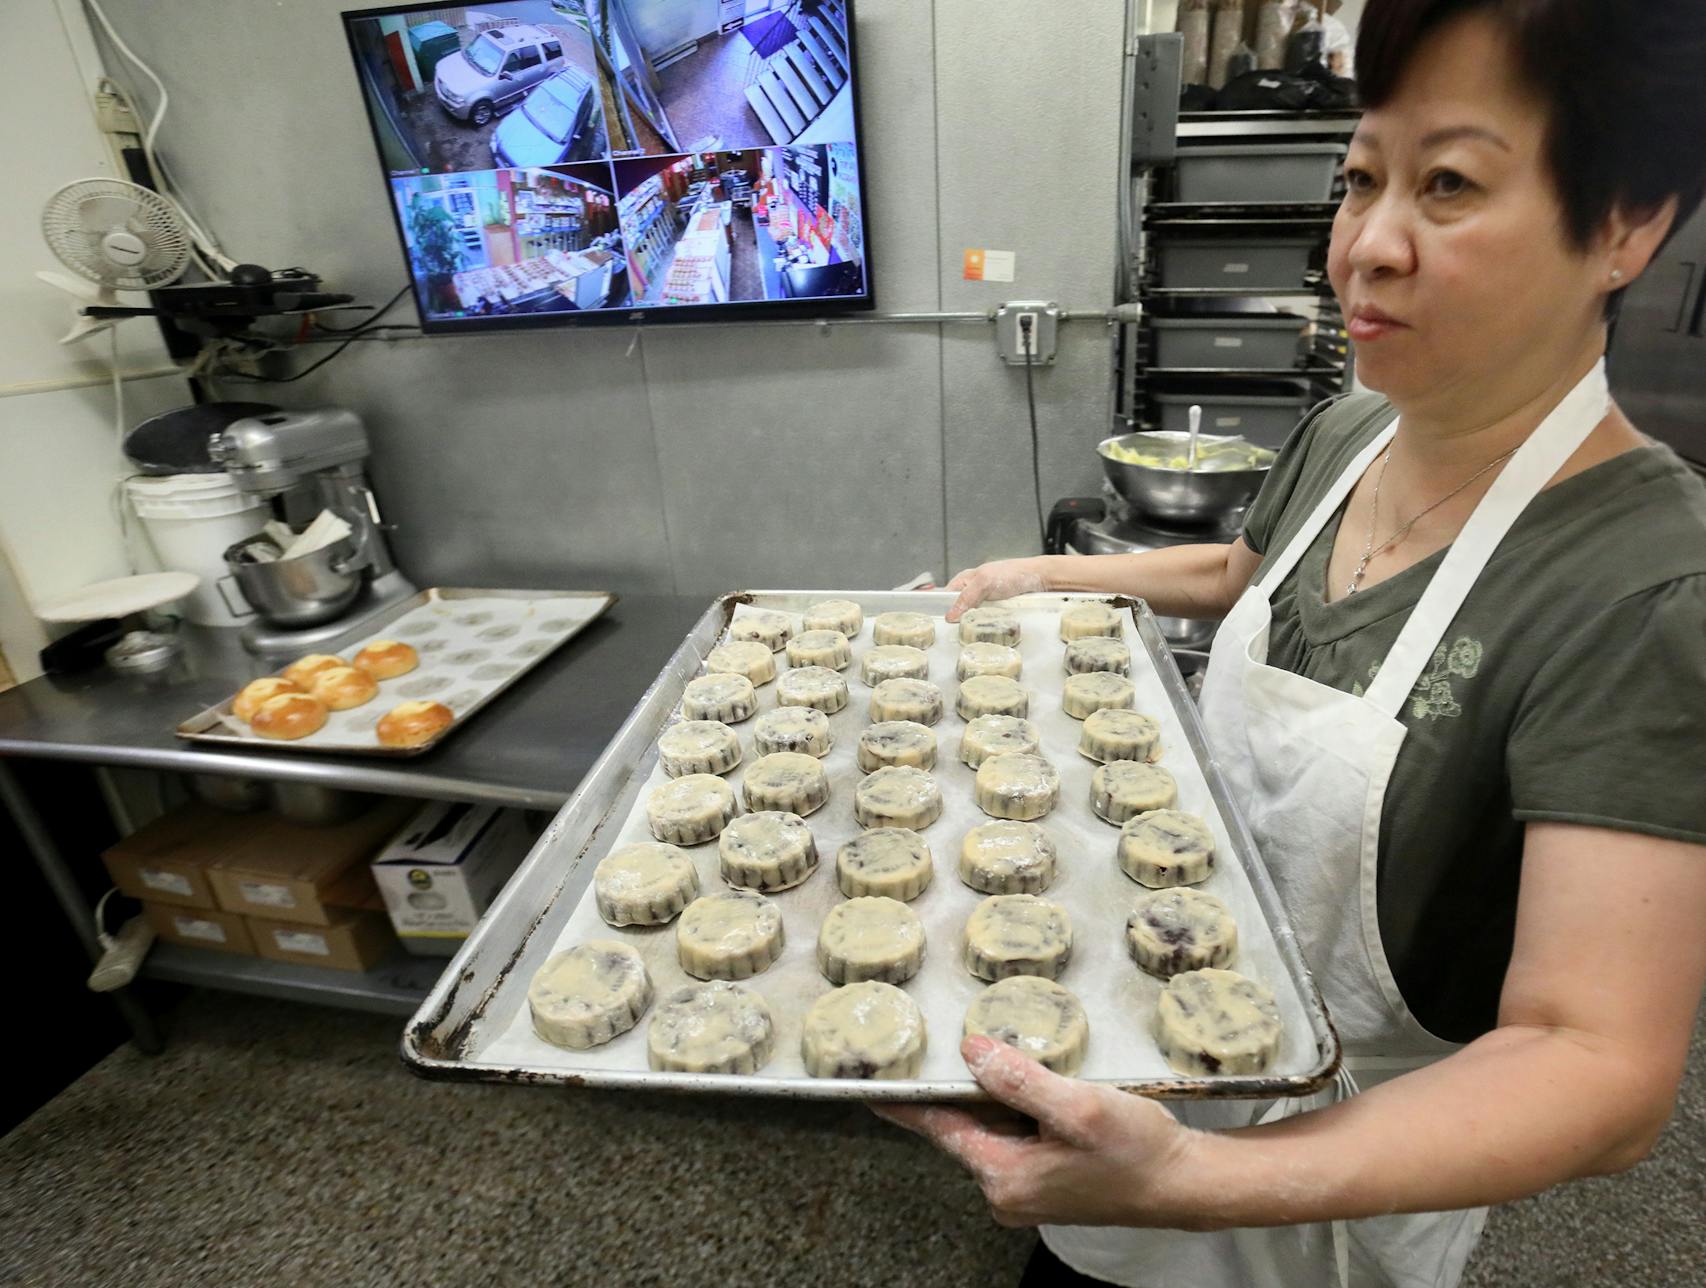 Pauline Kwan made mooncakes ahead of the lunar calendar harvest holiday that begins on Monday. Mooncakes are a specialty at the Mid-Autumn Festival and this is one of the only places in the Twin Cities where they are made. Here, Kwan, who has been making mooncakes for 35 years, with a batch of mini mooncakes ready for the oven at Keefer Court Bakery and Cafe Wednesday, Sept. 18, 2018, in Minneapolis, MN.] DAVID JOLES • david.joles@startribune.com Michelle Kwan is taking over the running of Keefer Court Bakery and Cafe from her parents. Her father was known as the fortune cookie king of the Twin Cities, supplying nearly all the local restaurants with them. According to legend, Han Chinese revolutionaries hid a message of war on the day of the Mid-Autumn Festival inside baked cakes and distributed them to the masses in order to deceive their Mongolian overlords back in the Yuan Dynasty.**Pauline Kwan,cq